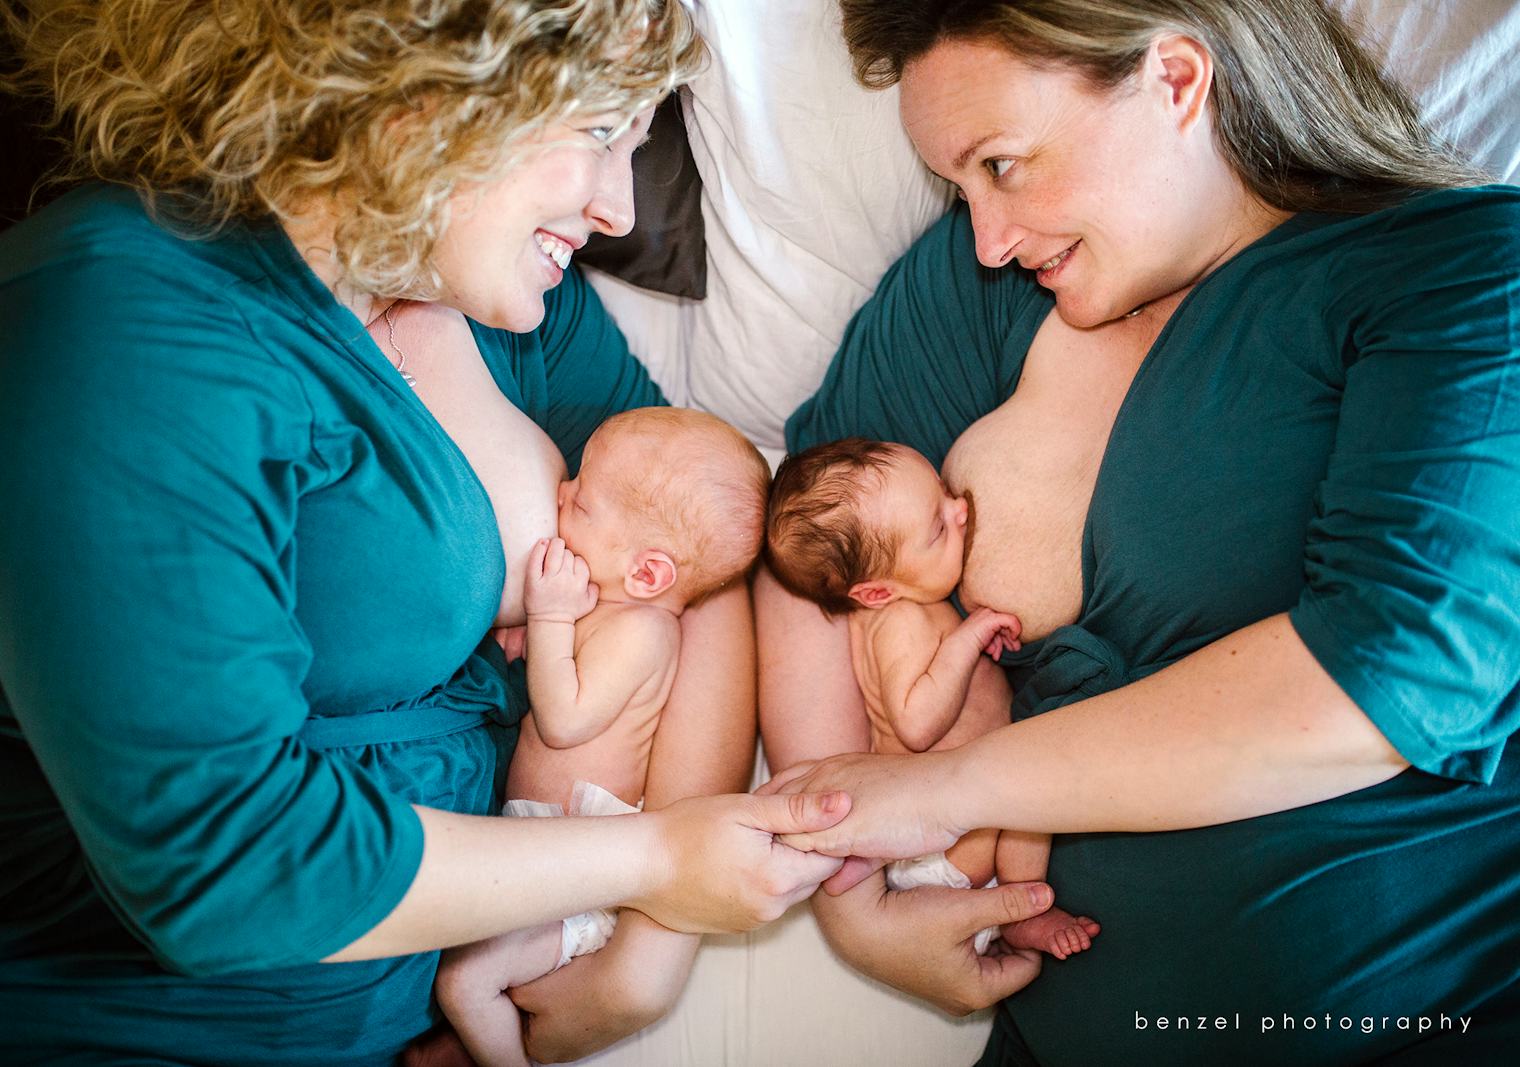 Viral Photo Of New Moms Breastfeeding Their Twins Is A Power photo photo